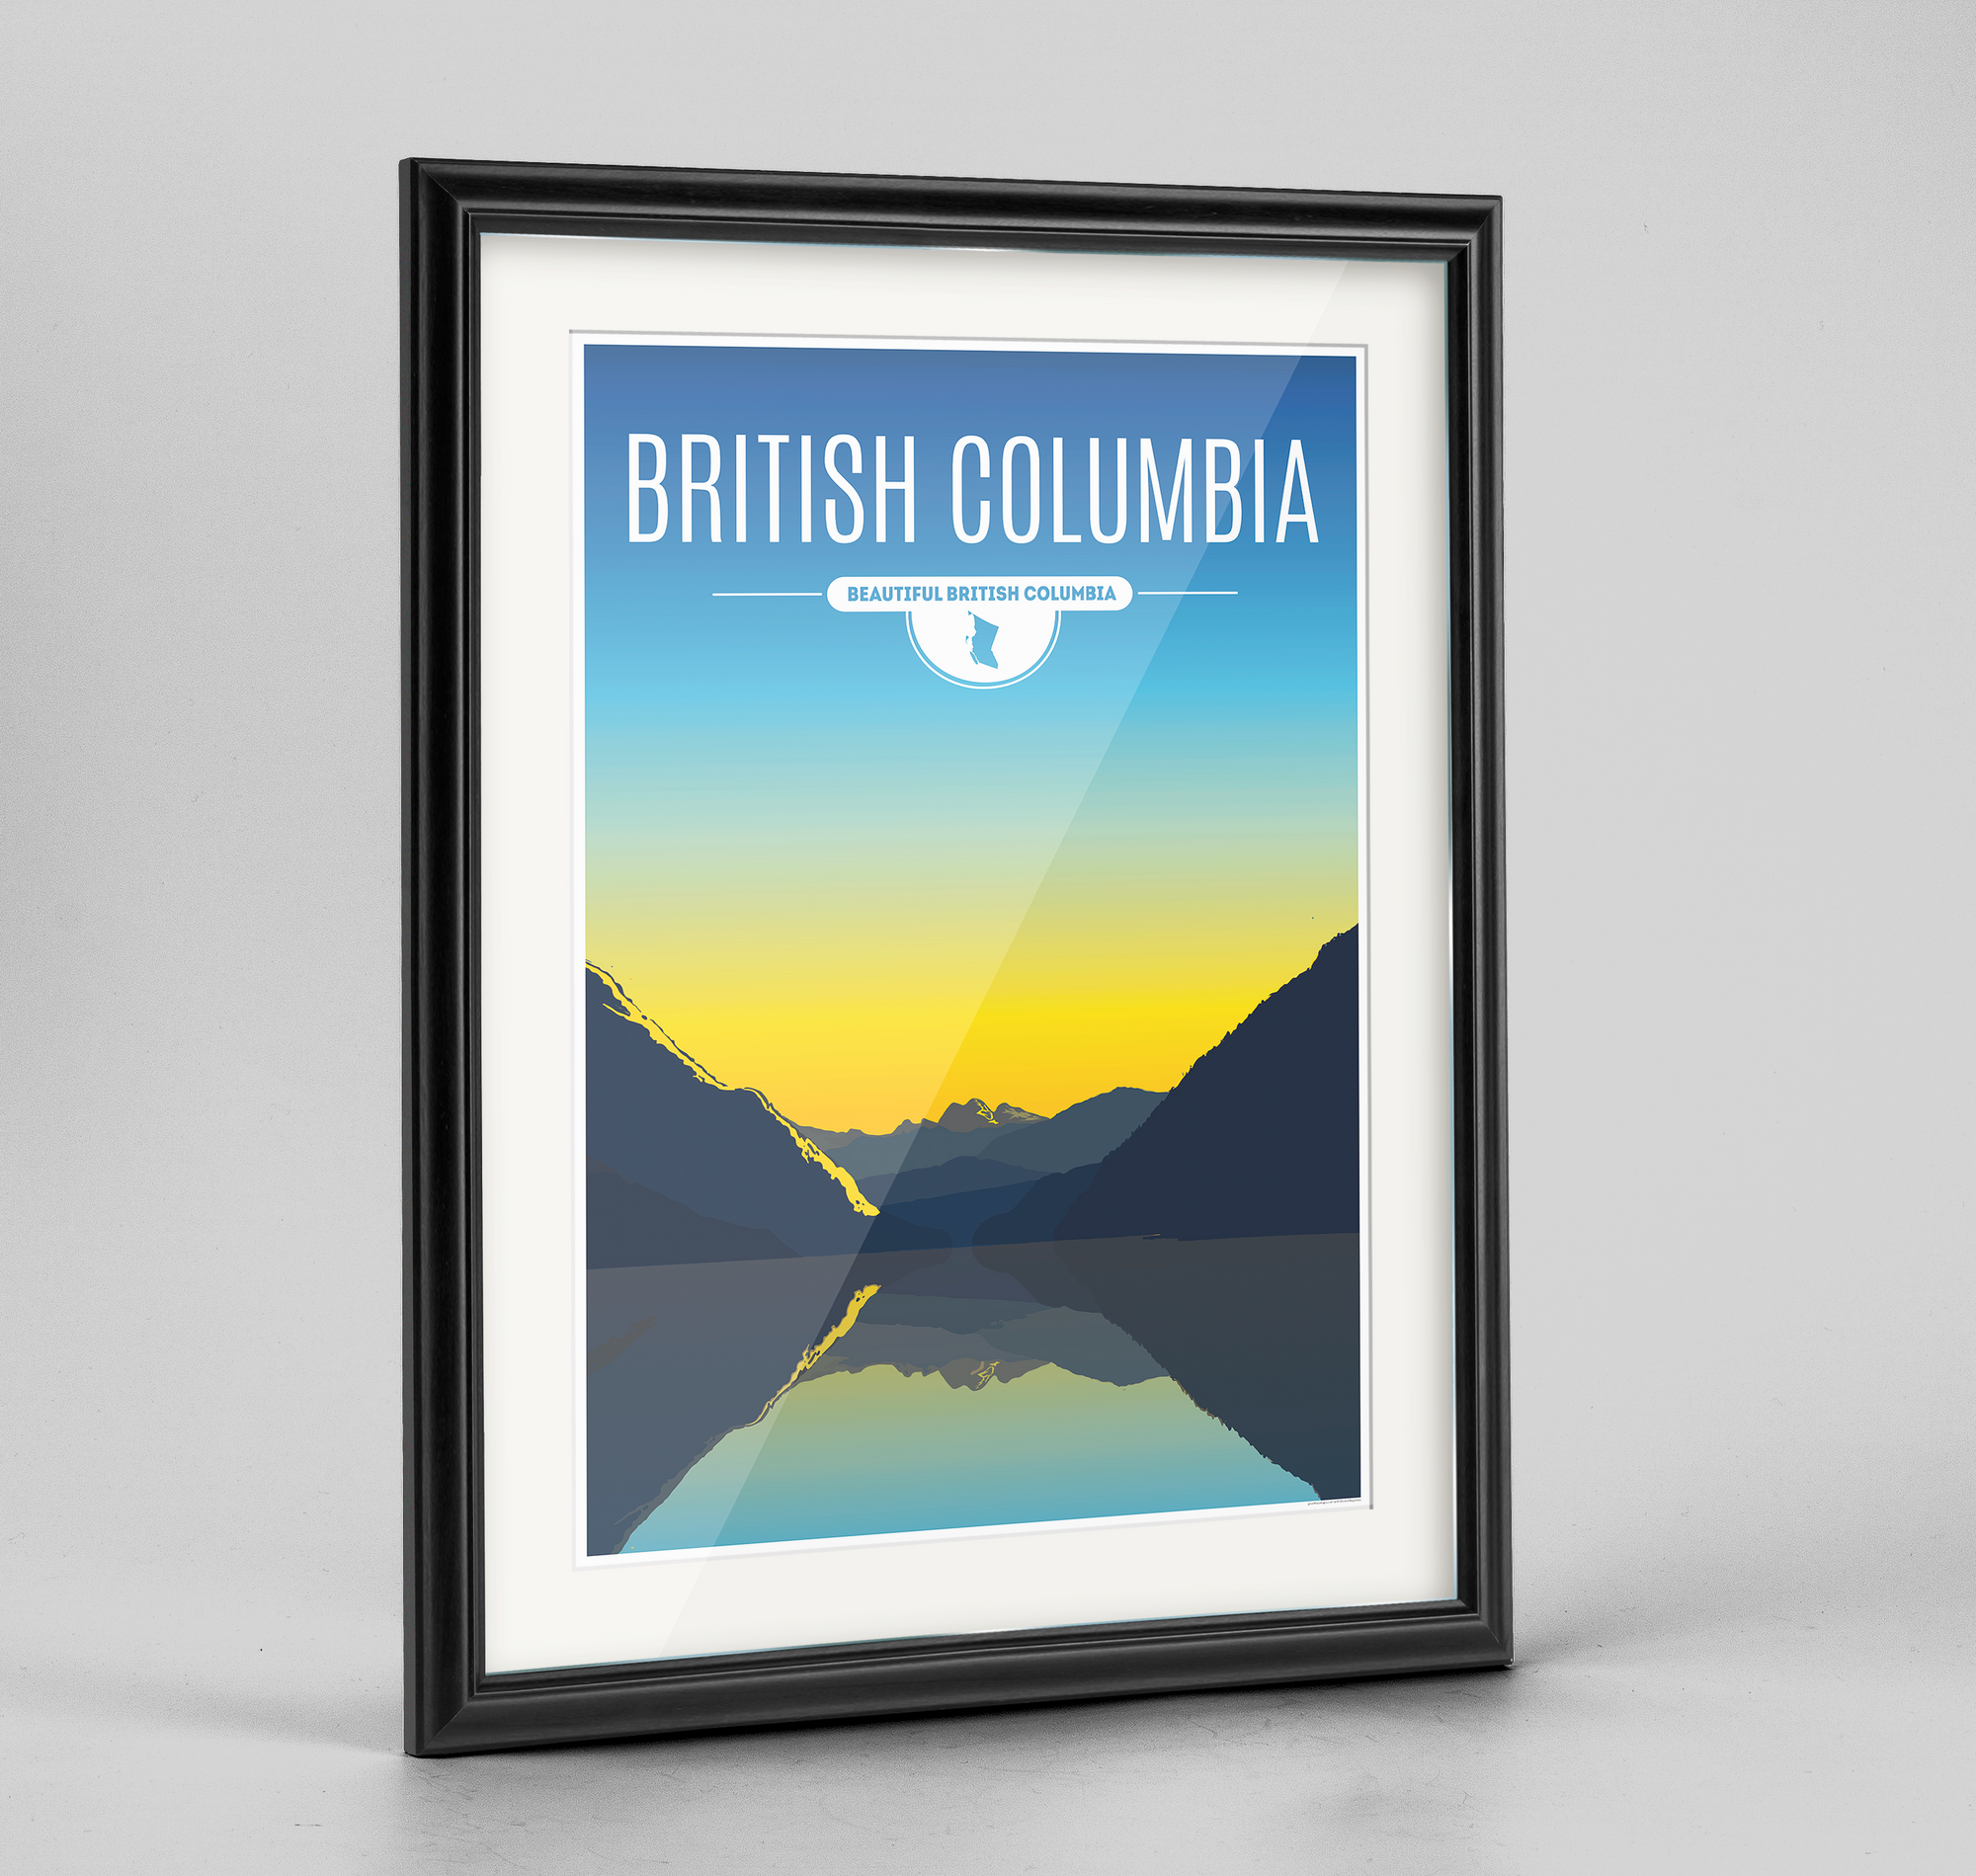 British Columbia Province Print - Point Two Design